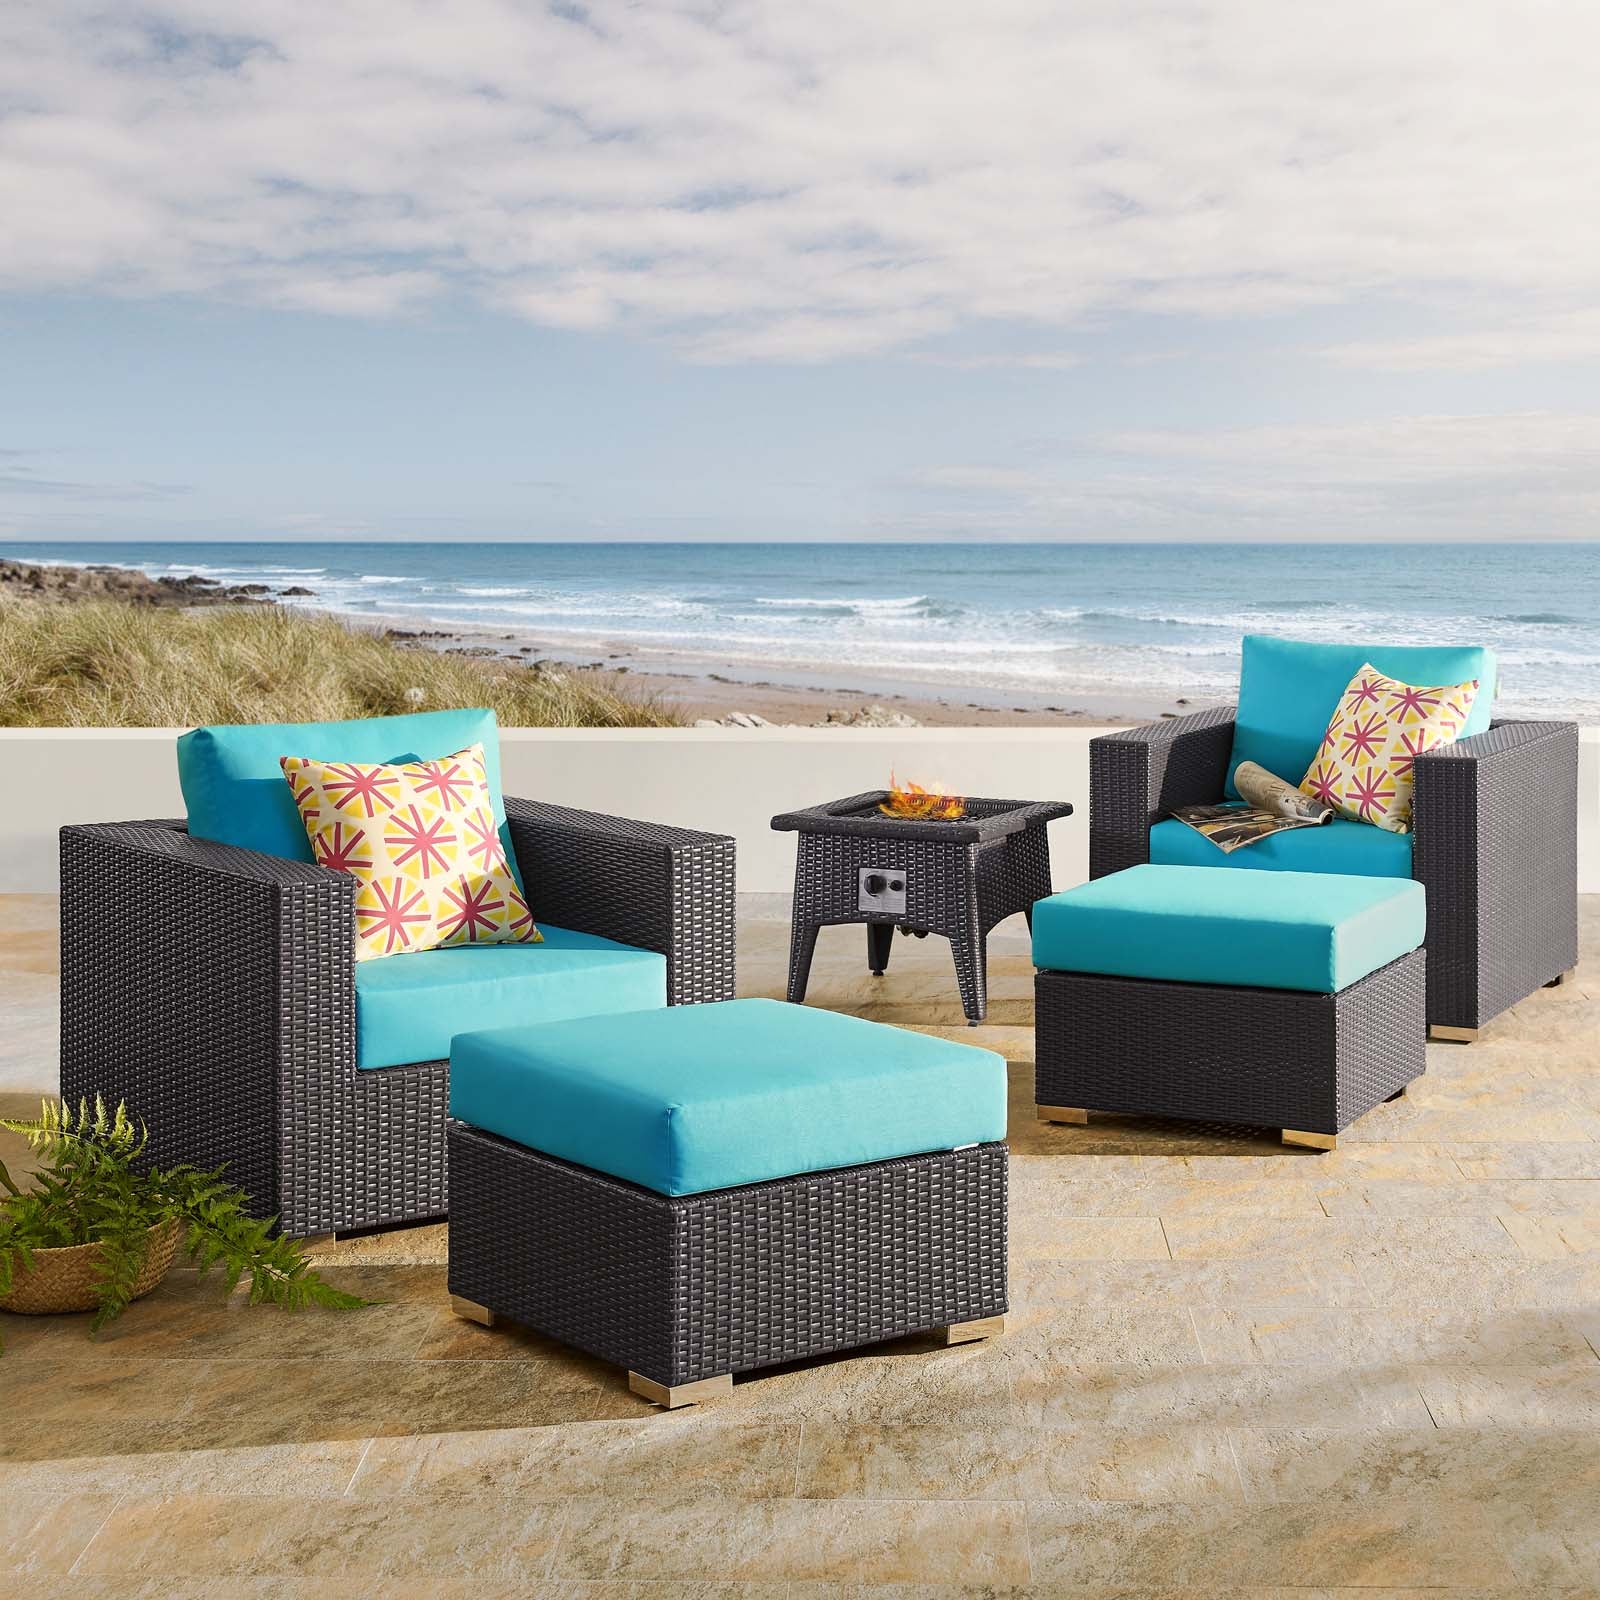 Modway Outdoor Conversation Sets - Convene 5 Piece Set Outdoor Patio with Fire Pit Espresso Turquoise